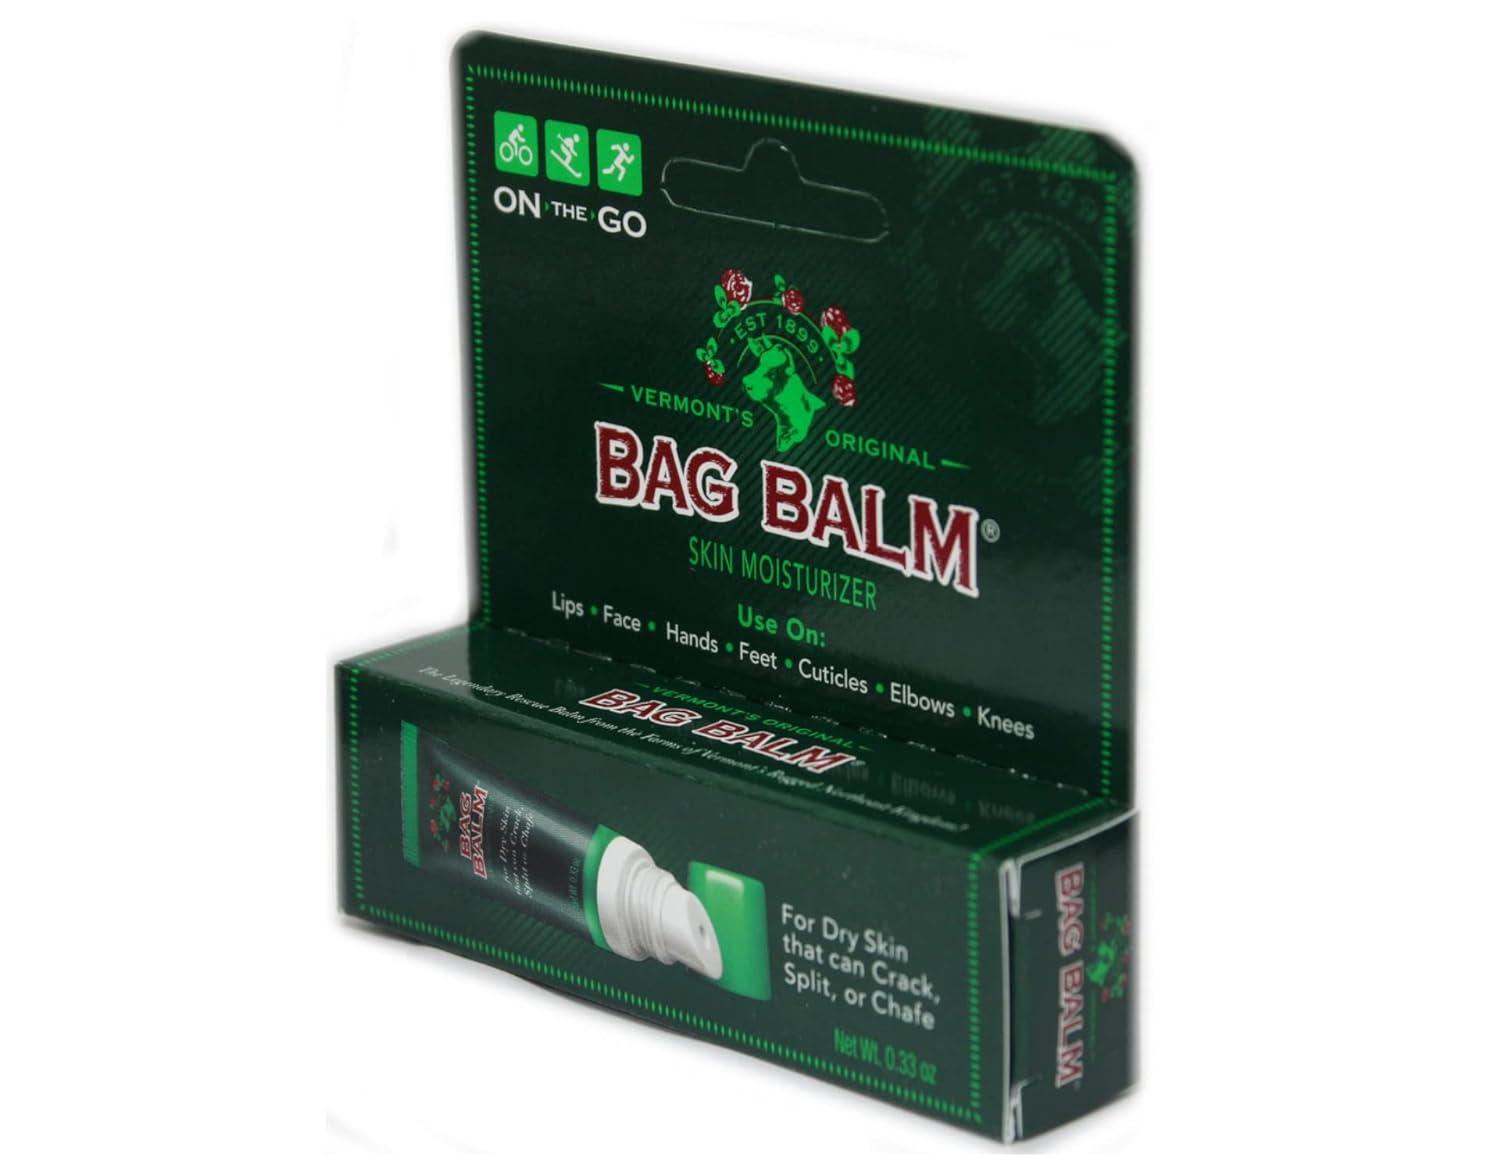 Bag Balm Original On-the-Go Lip Balm Tubes for Chapped Lips Dry Hands Skin  Irritations and More (Pack of 6 Tubes)